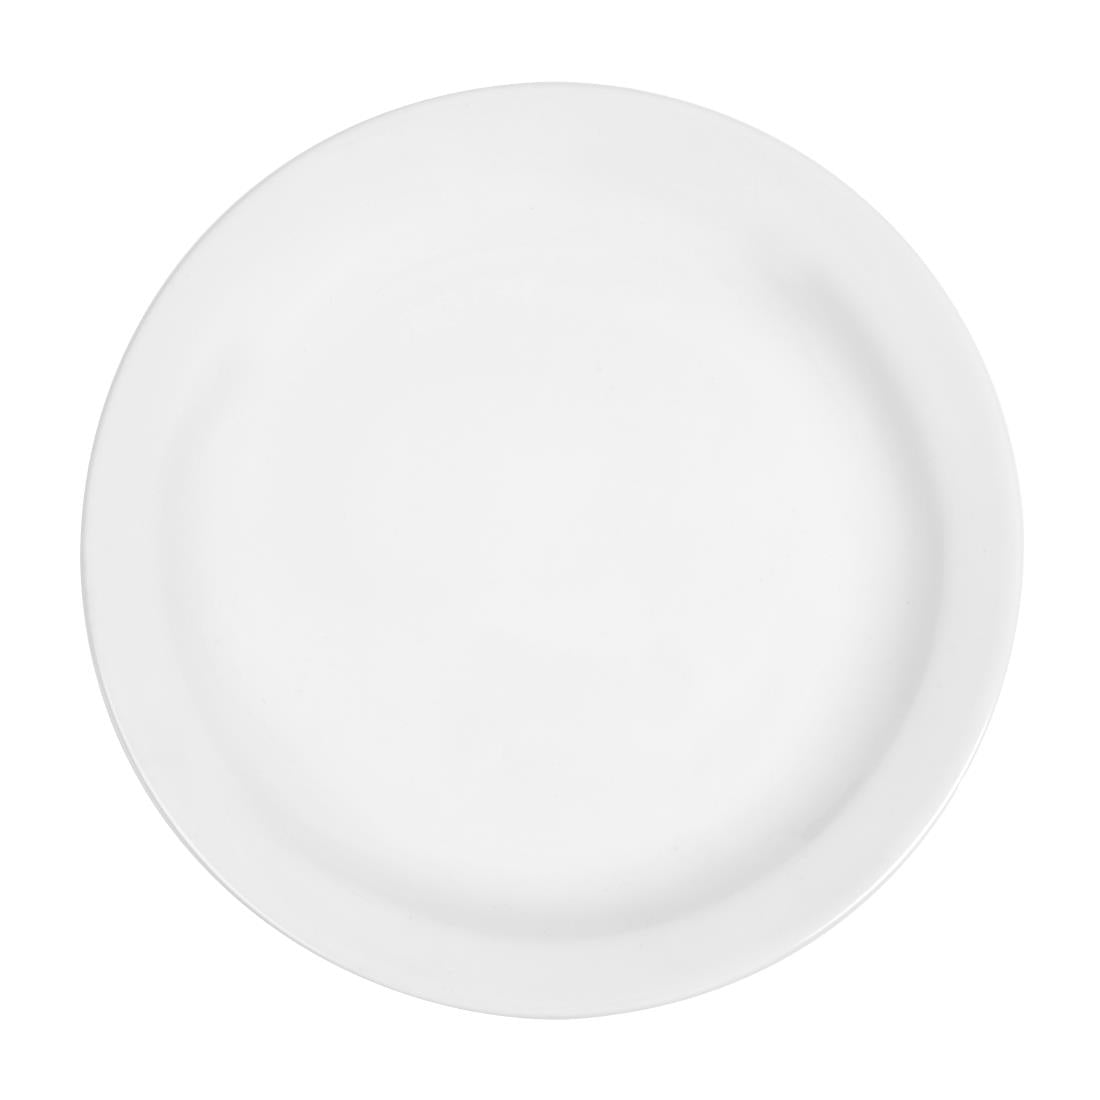 CB488 Olympia Whiteware Narrow Rimmed Plates 202mm (Pack of 12)